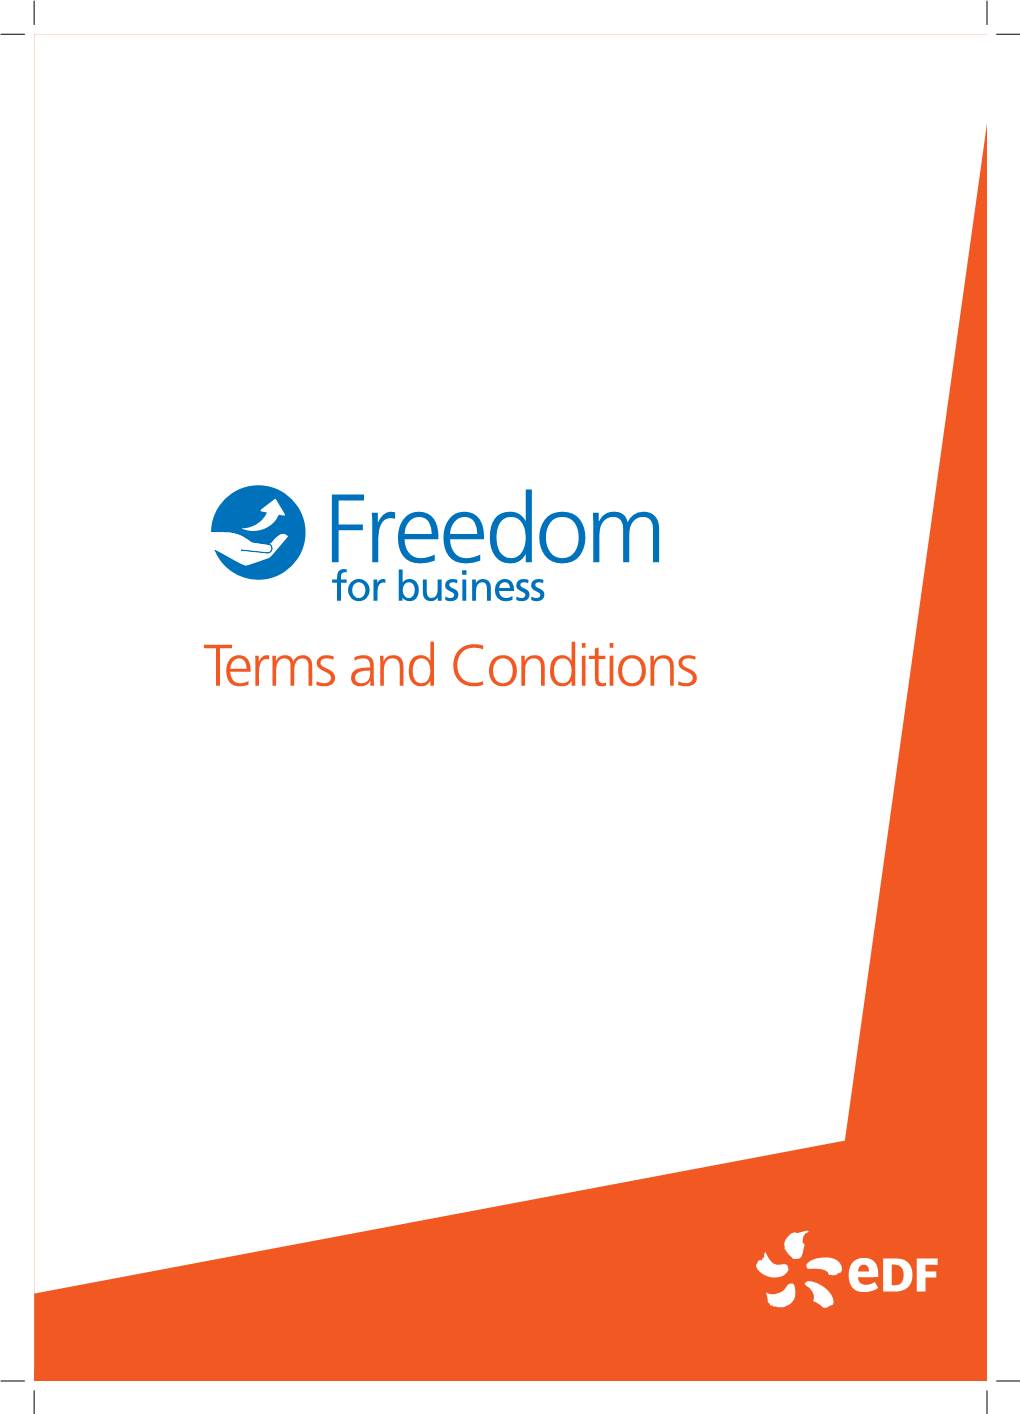 Terms and Conditions Introducing Freedom for Business, the First Energy Contract of Its Kind - Designed to Give You Ultimate Flexibility*